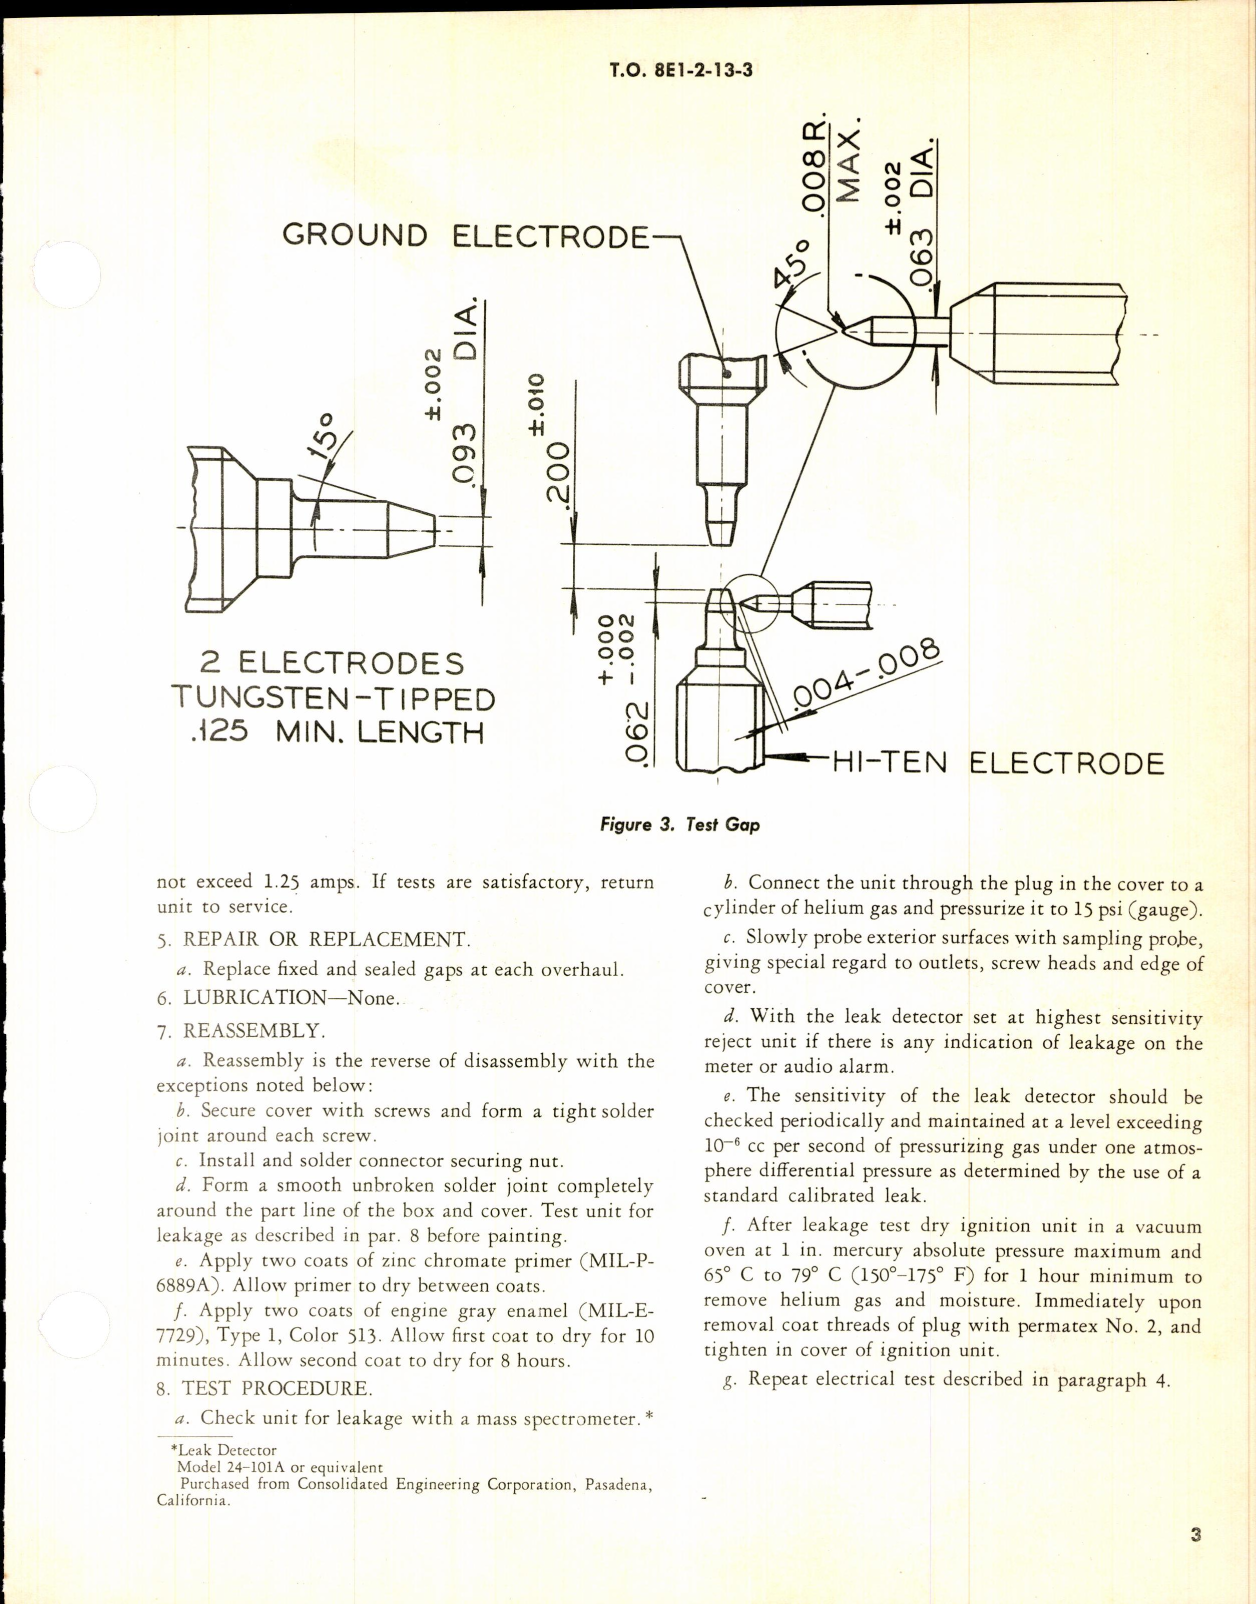 Sample page 3 from AirCorps Library document: Instructions w Parts Breakdown for TFN-1 Ignition System